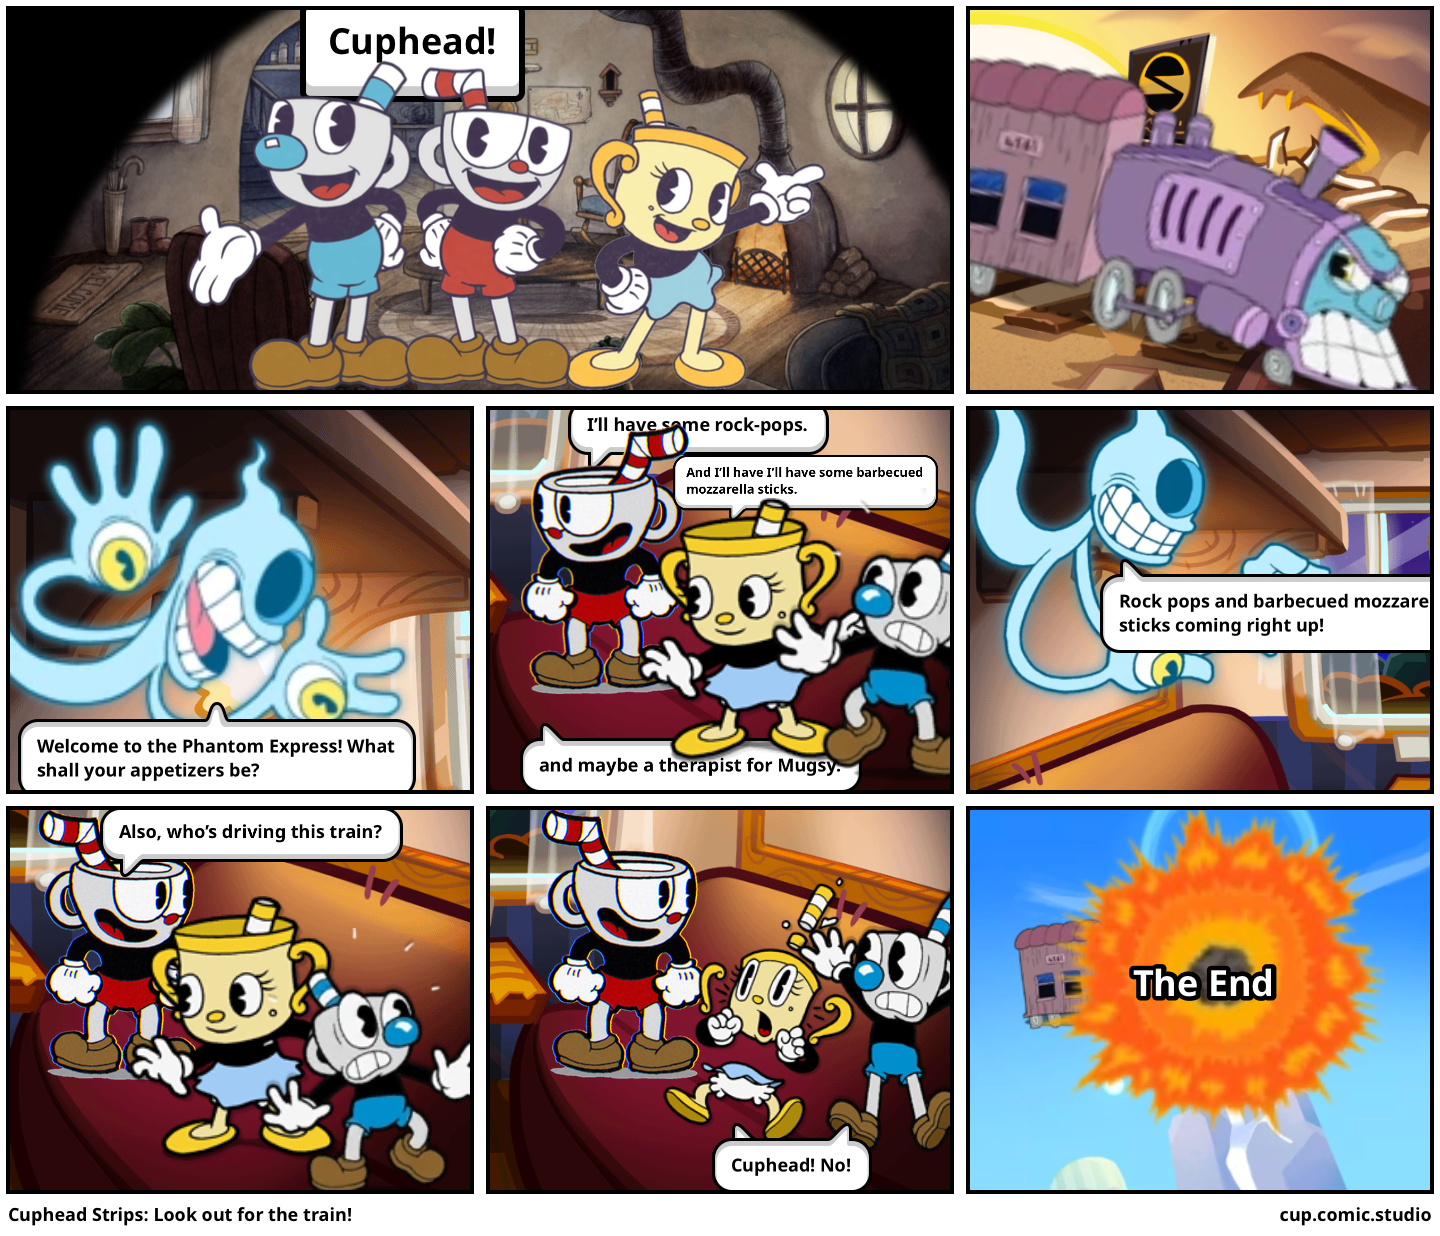 Cuphead Strips: Look out for the train!